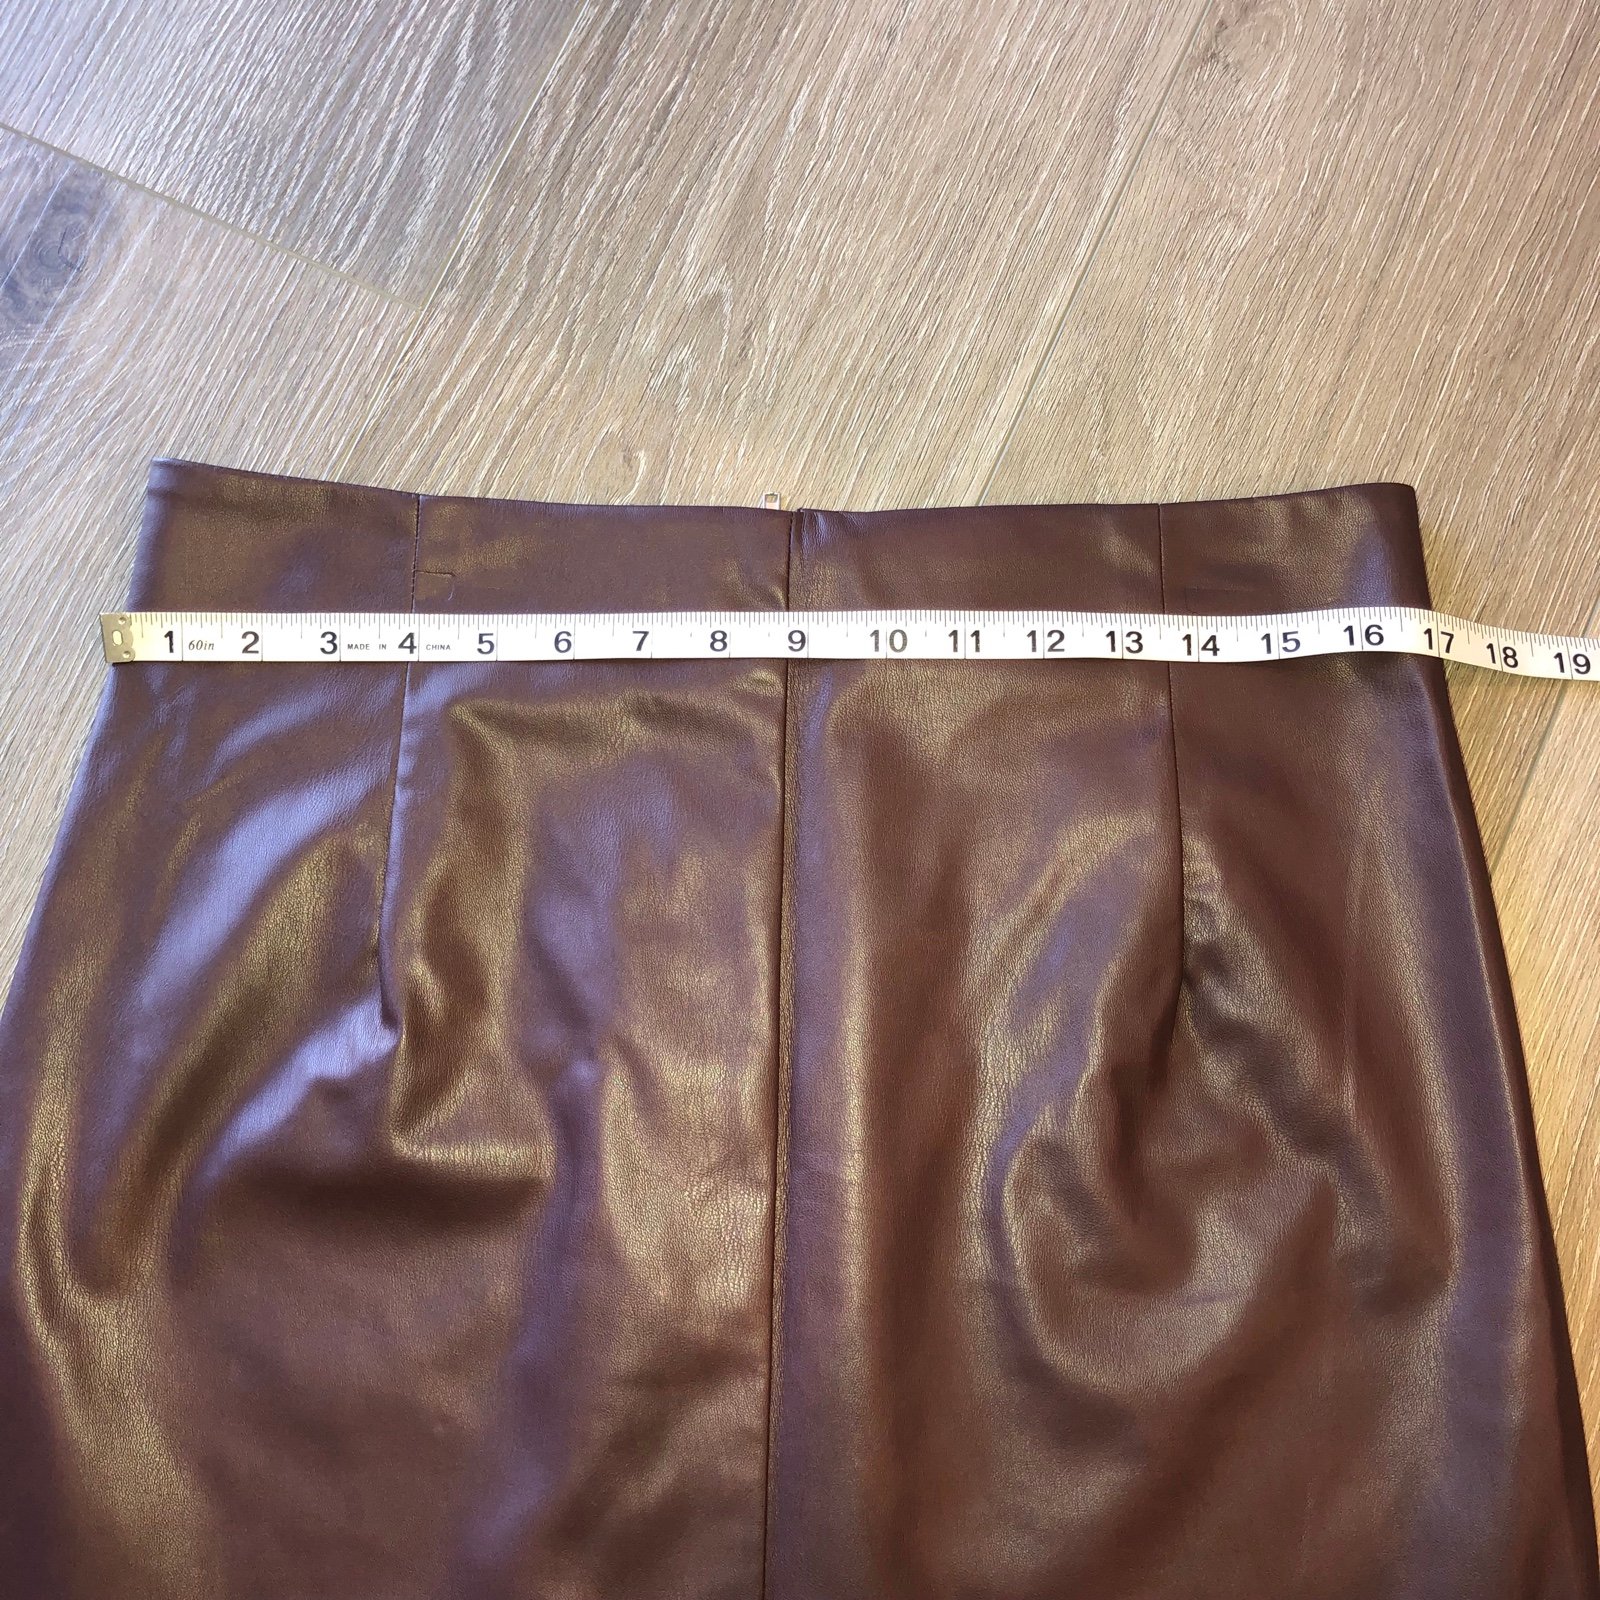 save up to 70% H&M Faux Leather Skirt Burgundy Size 12 OQegClTO4 Buying Cheap